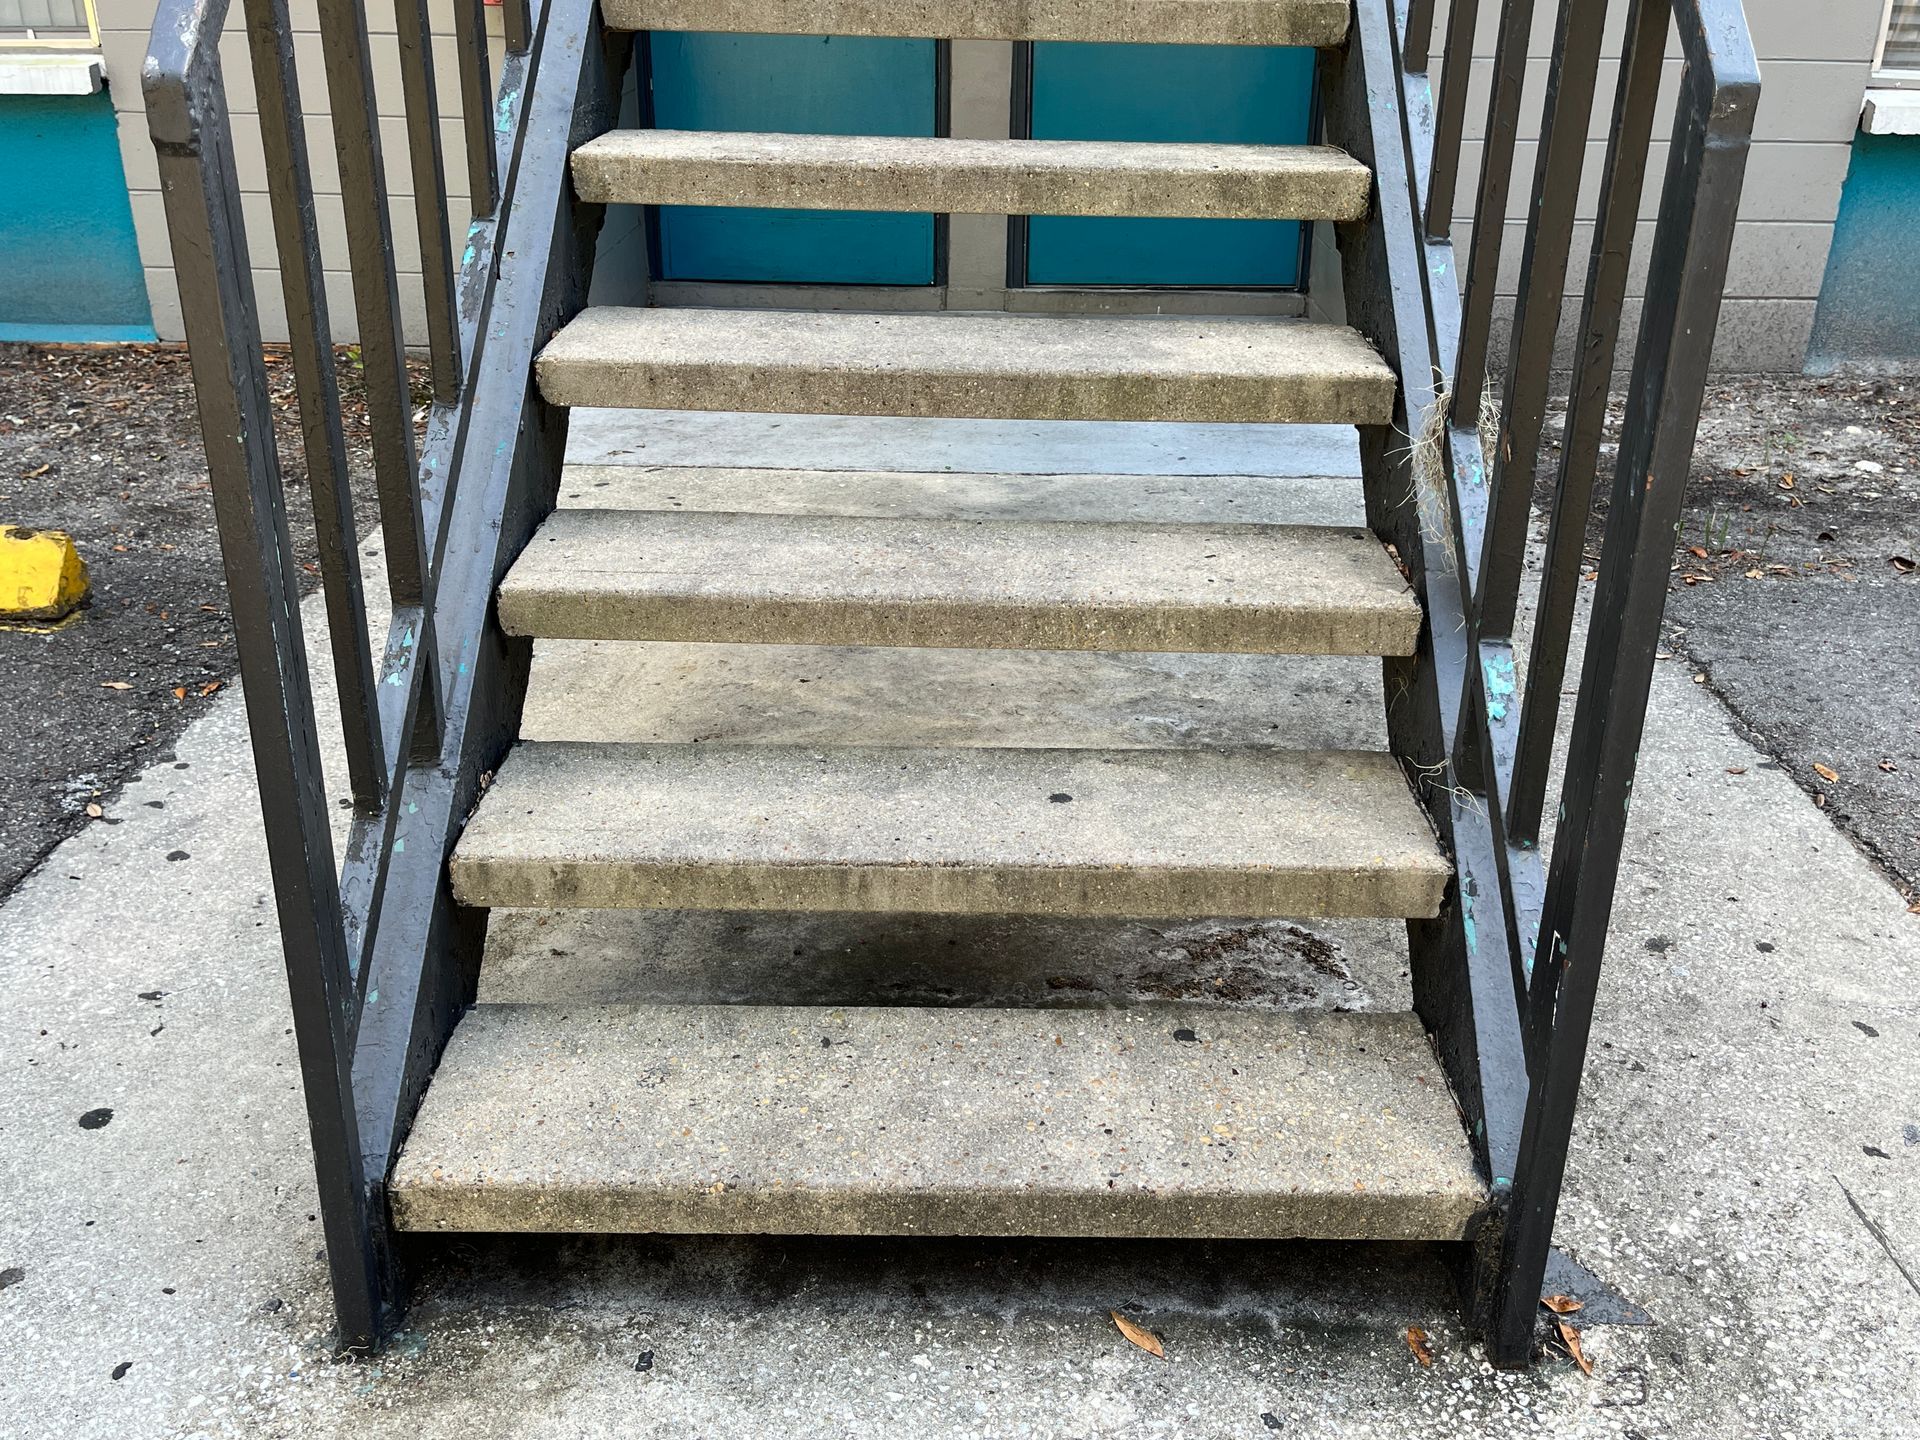 Steel stairs with concrete treads in Tampa